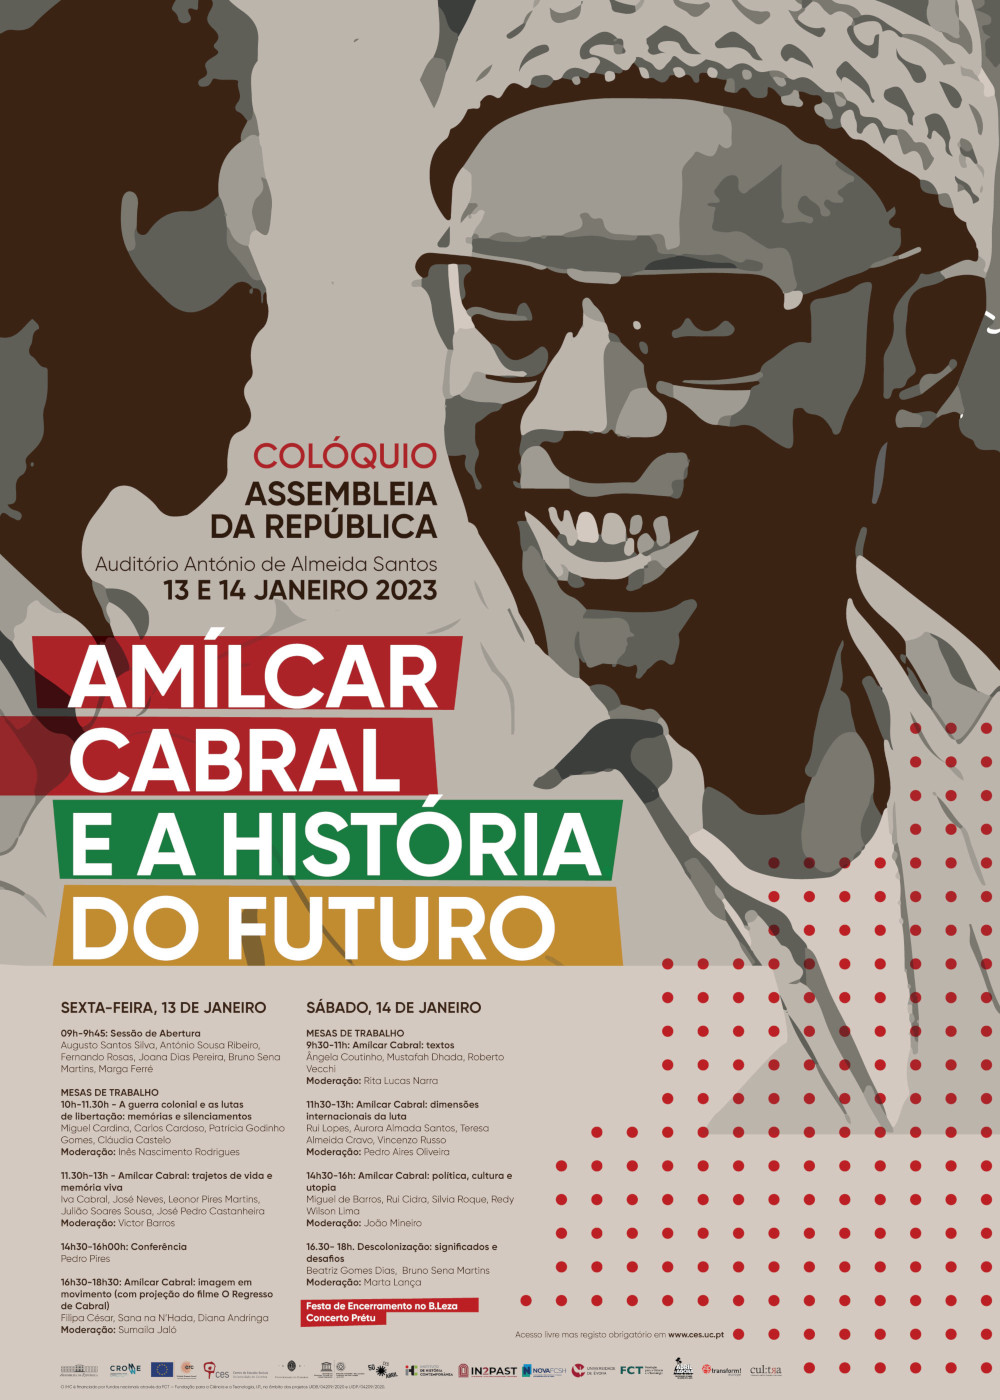 Amílcar Cabral and the History of the Future<span id="edit_41170"><script>$(function() { $('#edit_41170').load( "/myces/user/editobj.php?tipo=evento&id=41170" ); });</script></span>